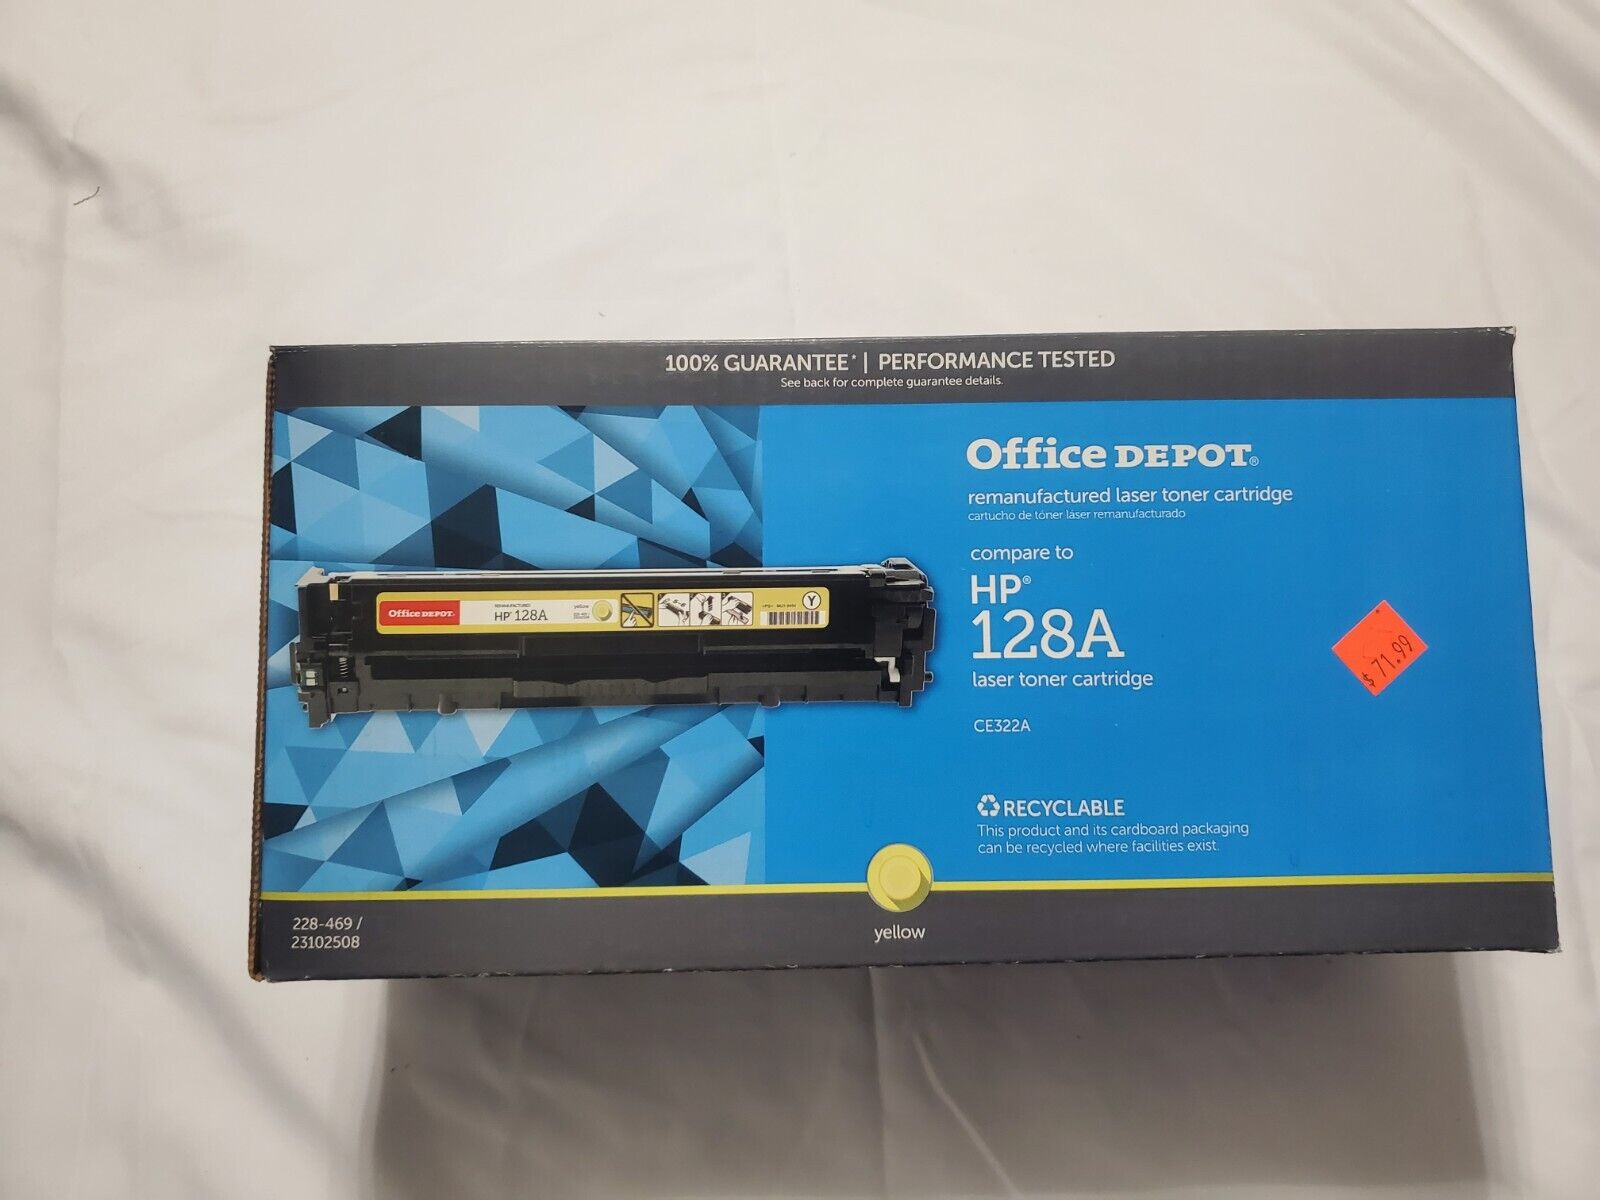 Office Depot Compared To HP 128A Laser Toner Cartridge color Yellow CE322A